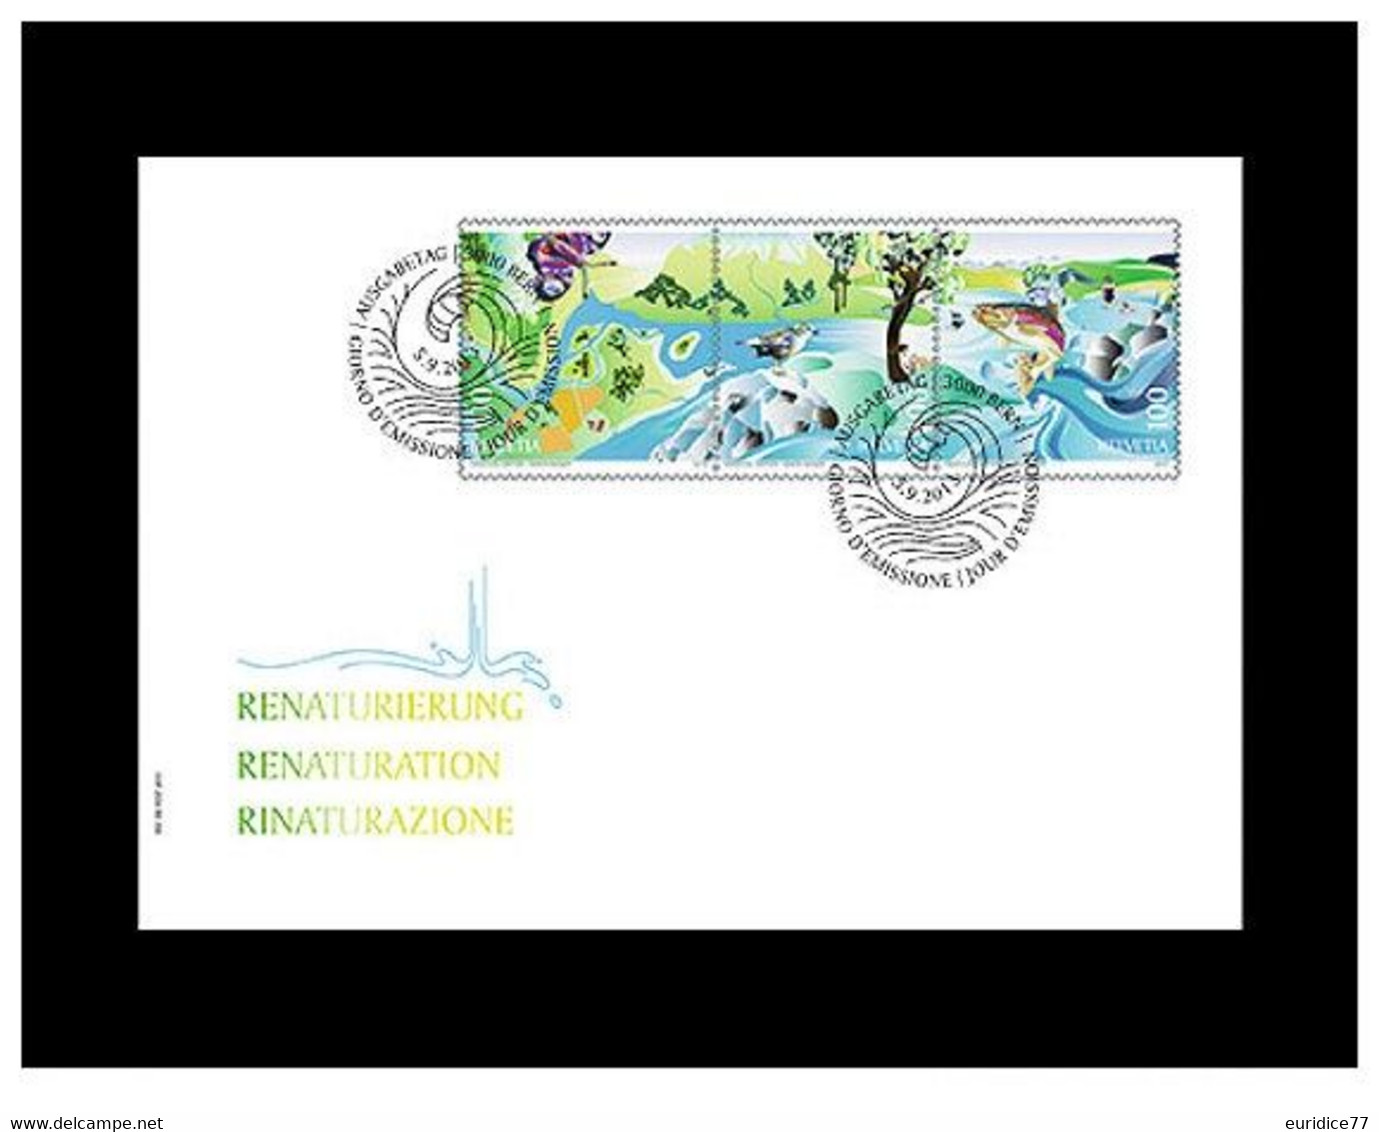 Switzerland 2013 - Restoration FDC - First Day Cover - Unused Stamps